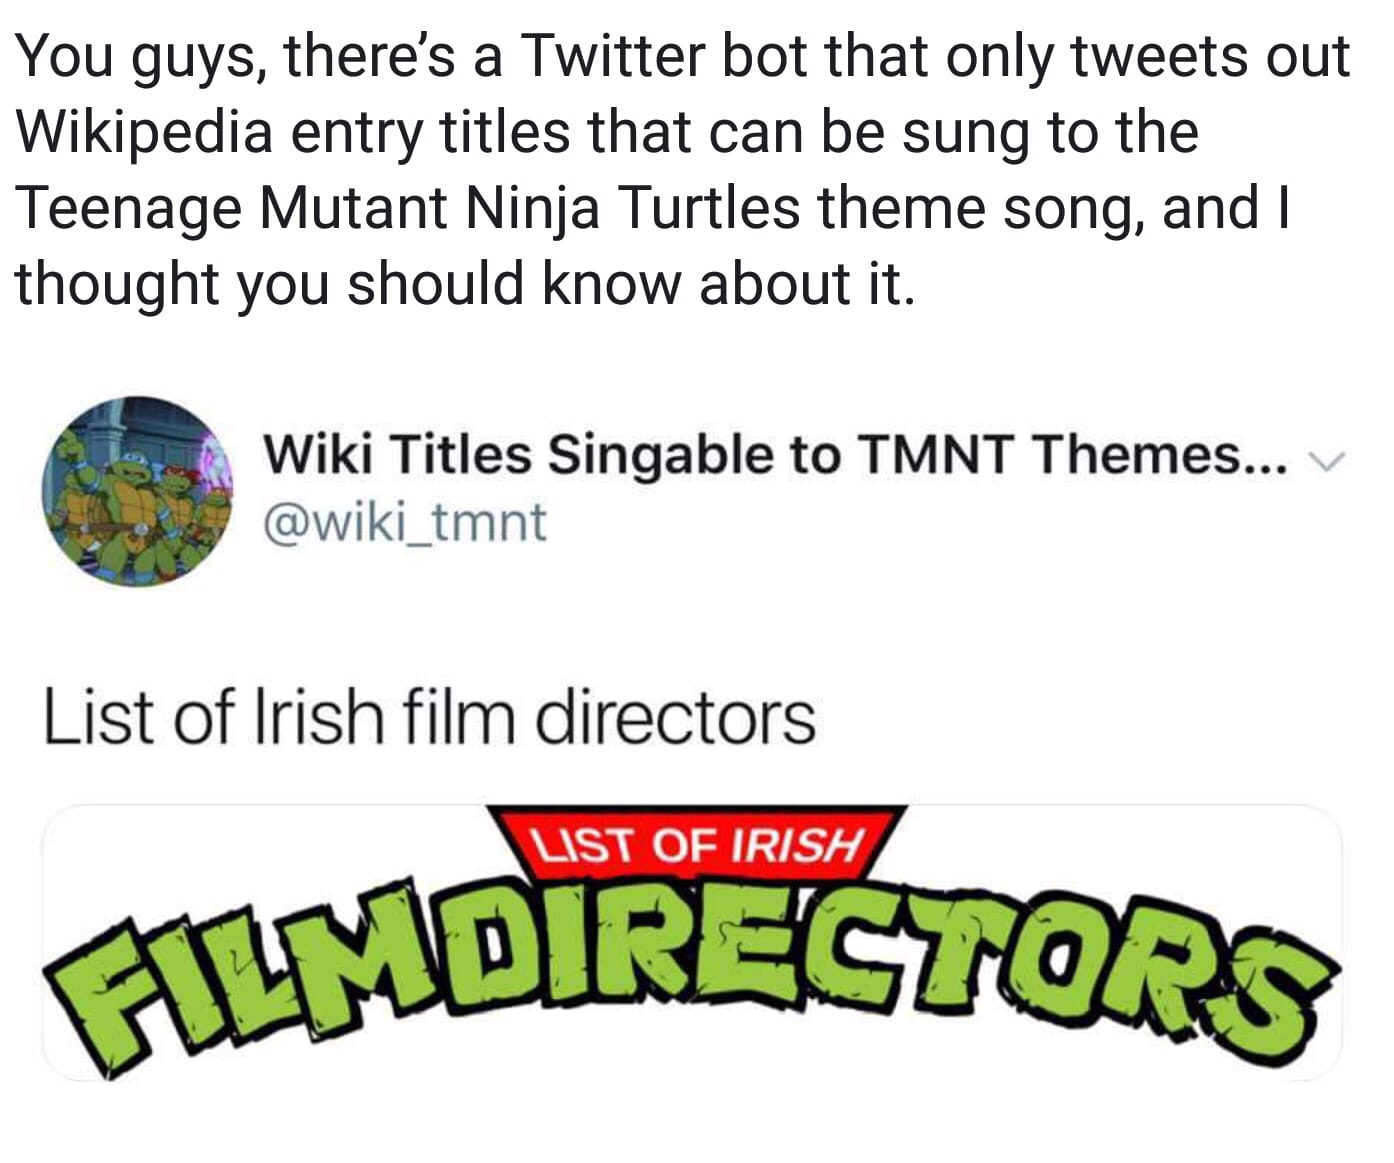 point - You guys, there's a Twitter bot that only tweets out Wikipedia entry titles that can be sung to the Teenage Mutant Ninja Turtles theme song, and I thought you should know about it. Wiki Titles Singable to Tmnt Themes... V tmnt List of Irish film d